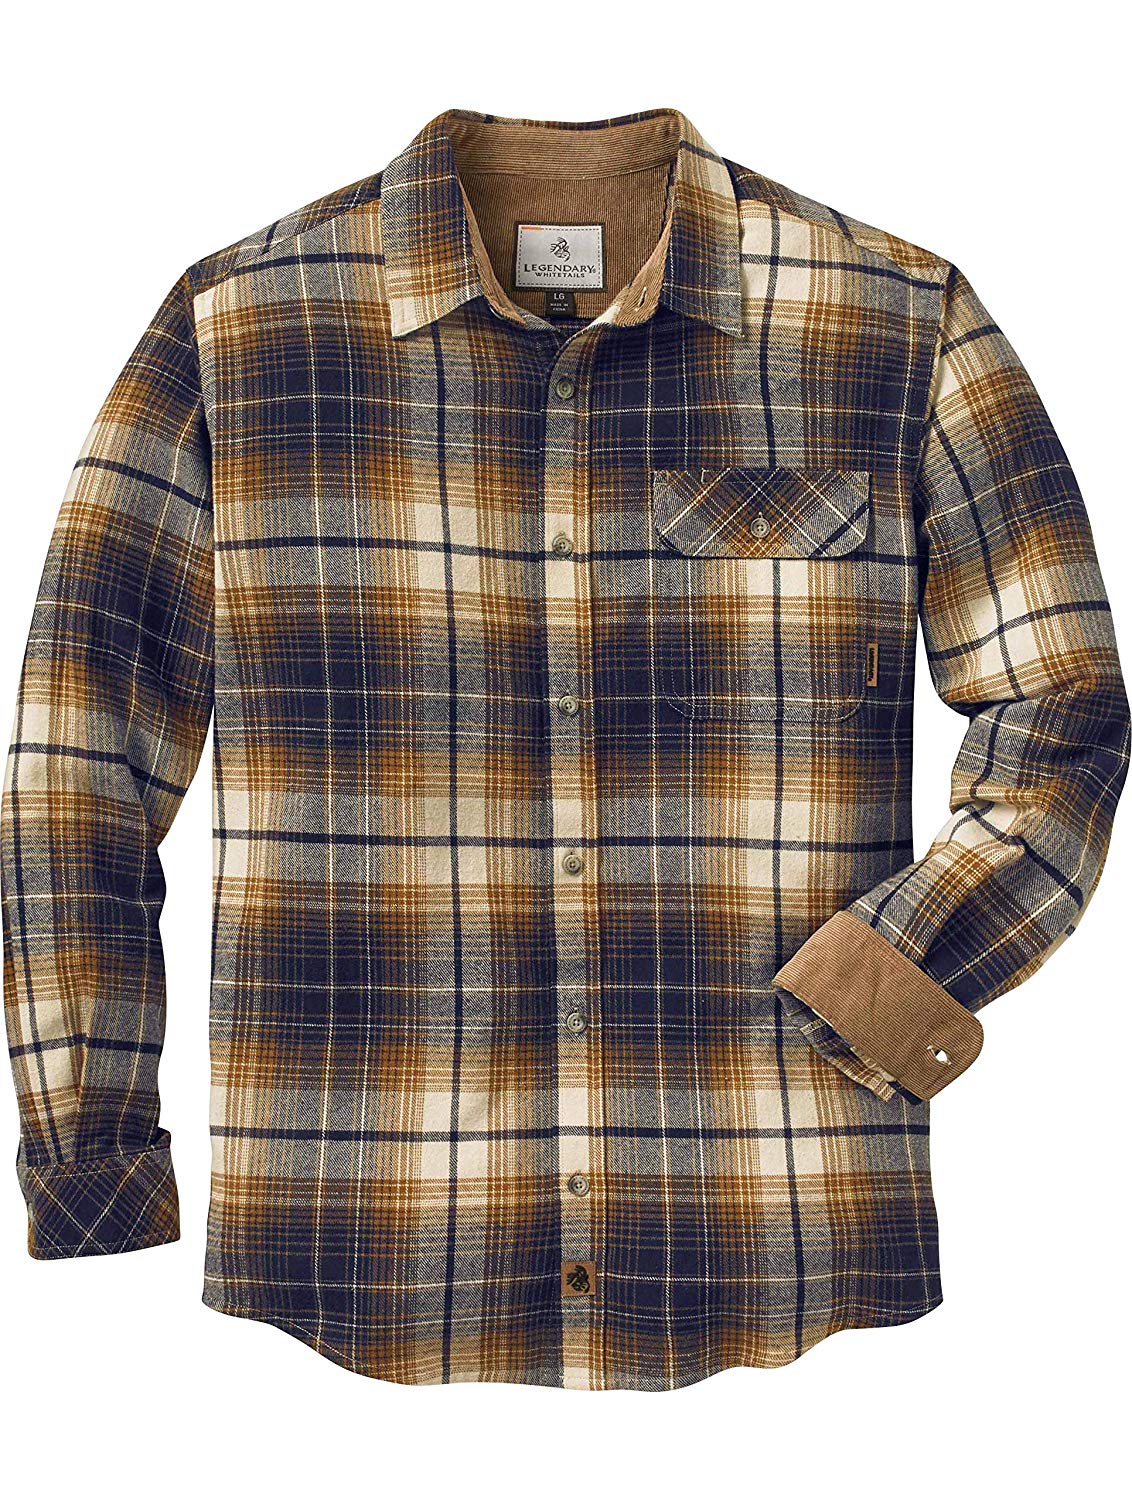 Legendary Whitetails Flannel Shirt | Pros Cons Shopping